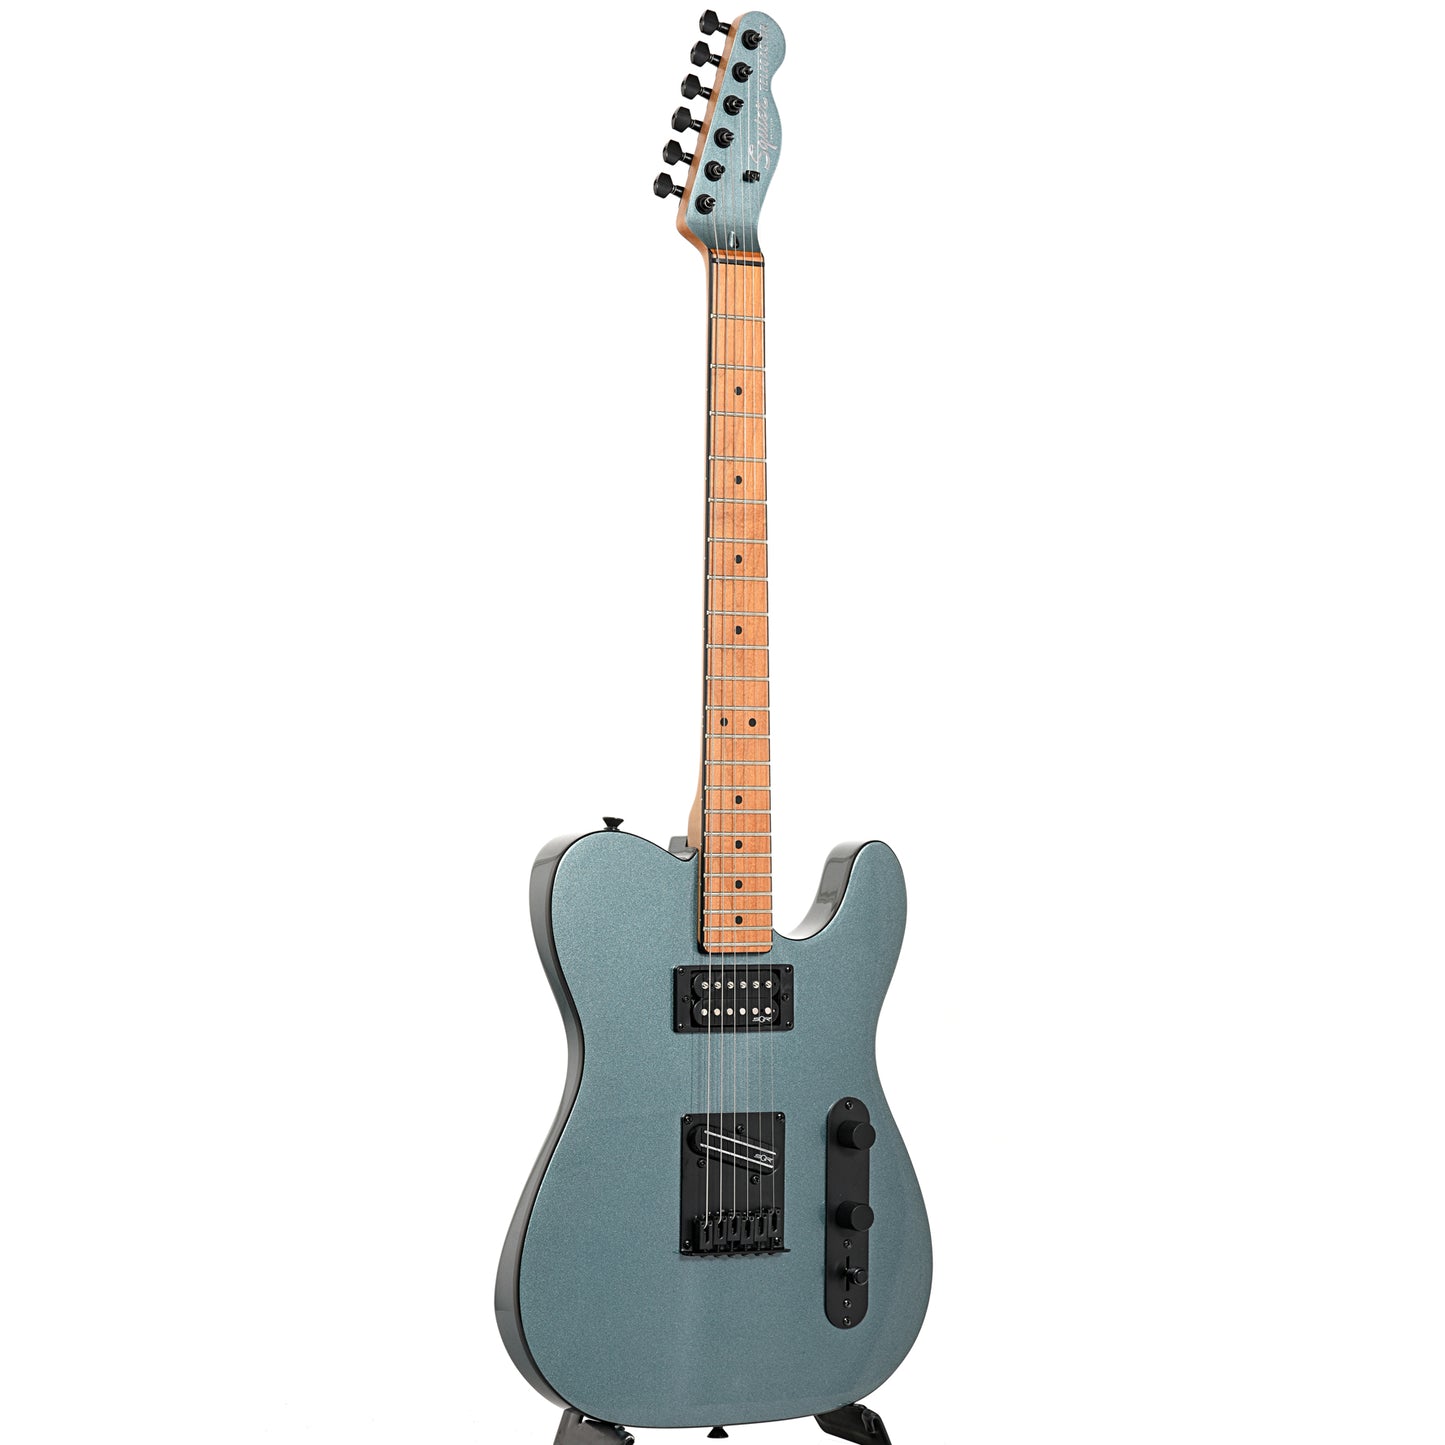 Image 11 of Squier Contemporary Telecaster RH, Gunmetal Metallic - SKU# SCTRHGM : Product Type Solid Body Electric Guitars : Elderly Instruments